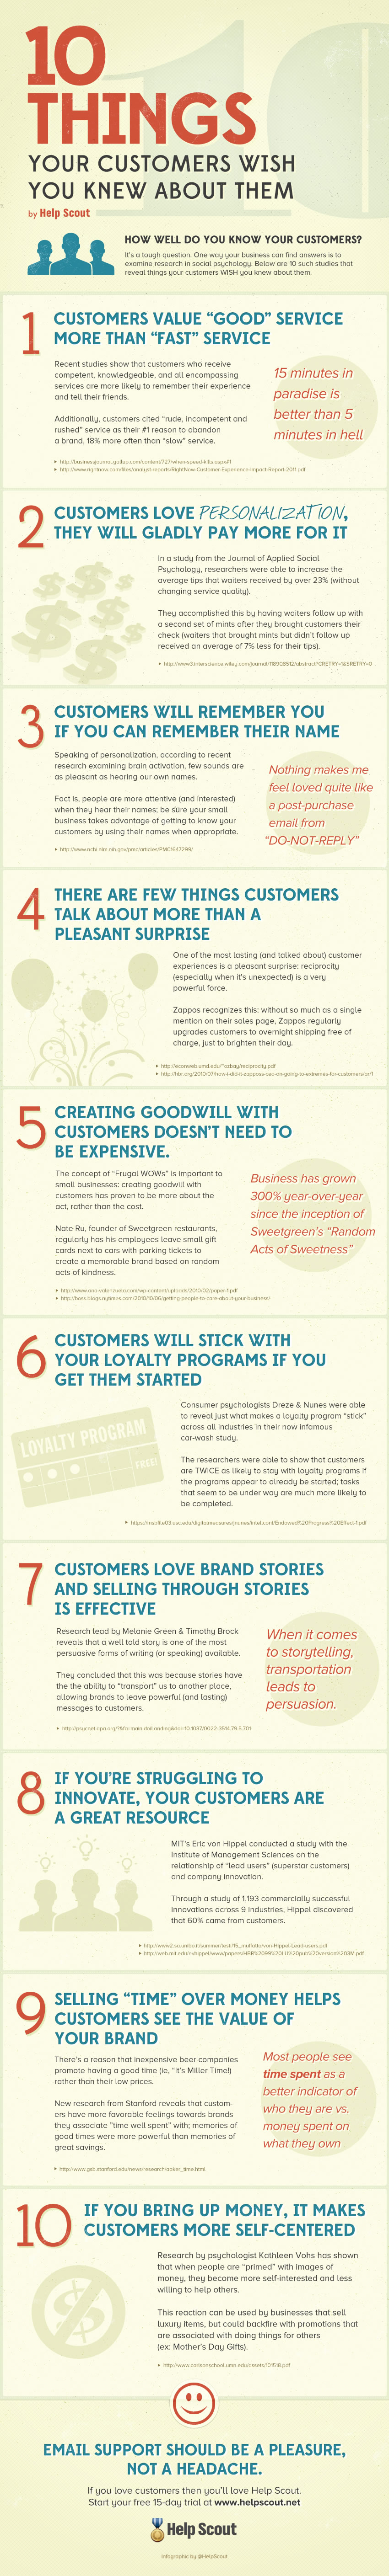 Infographic Ten Things Customers Want You To Know